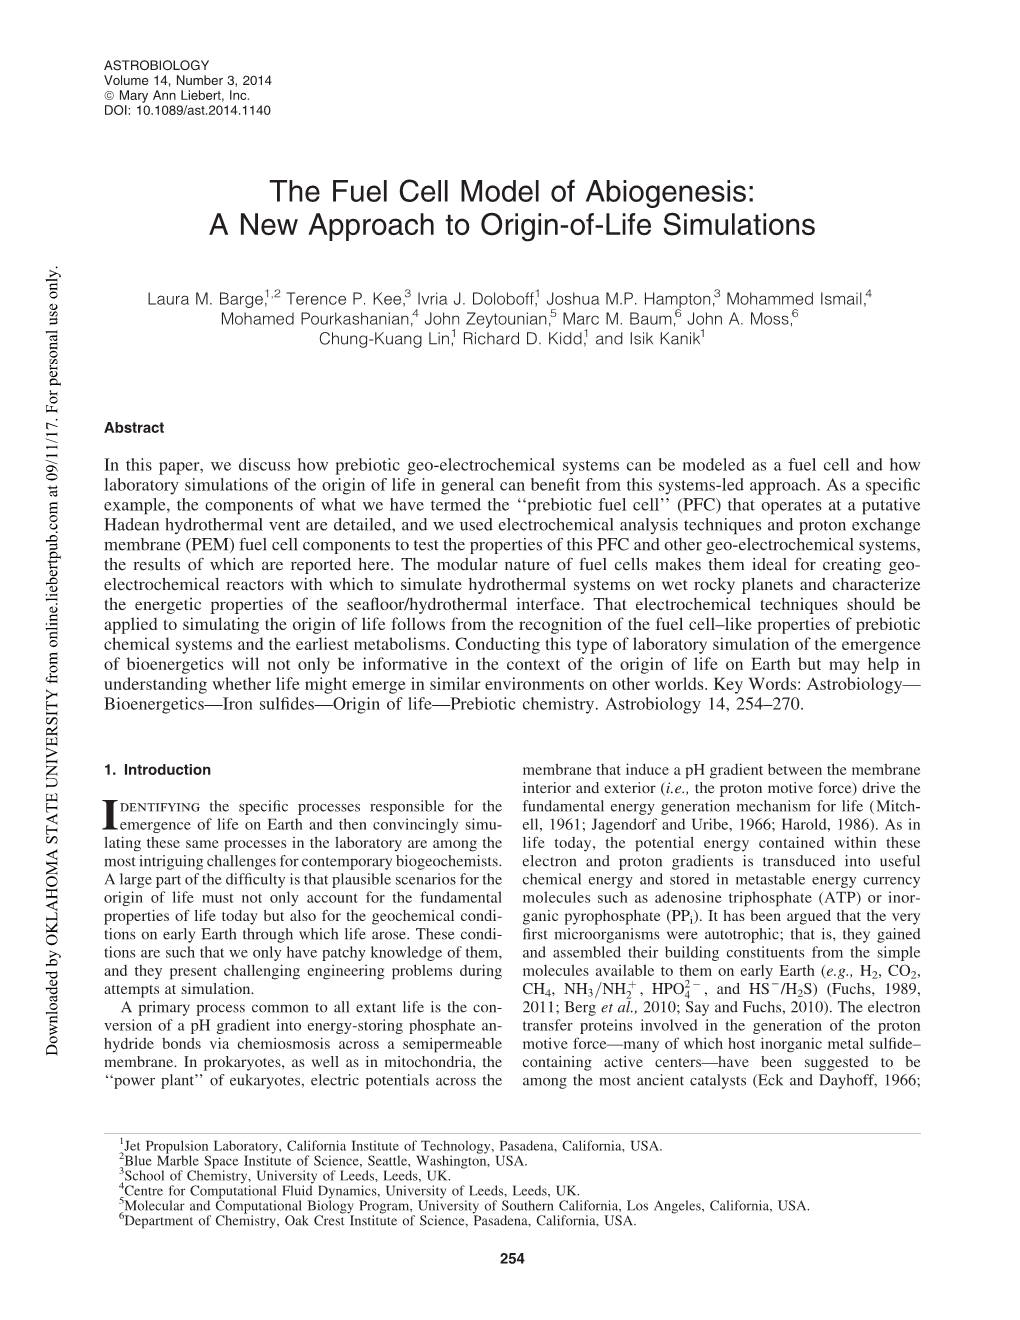 The Fuel Cell Model of Abiogenesis: a New Approach to Origin-Of-Life Simulations